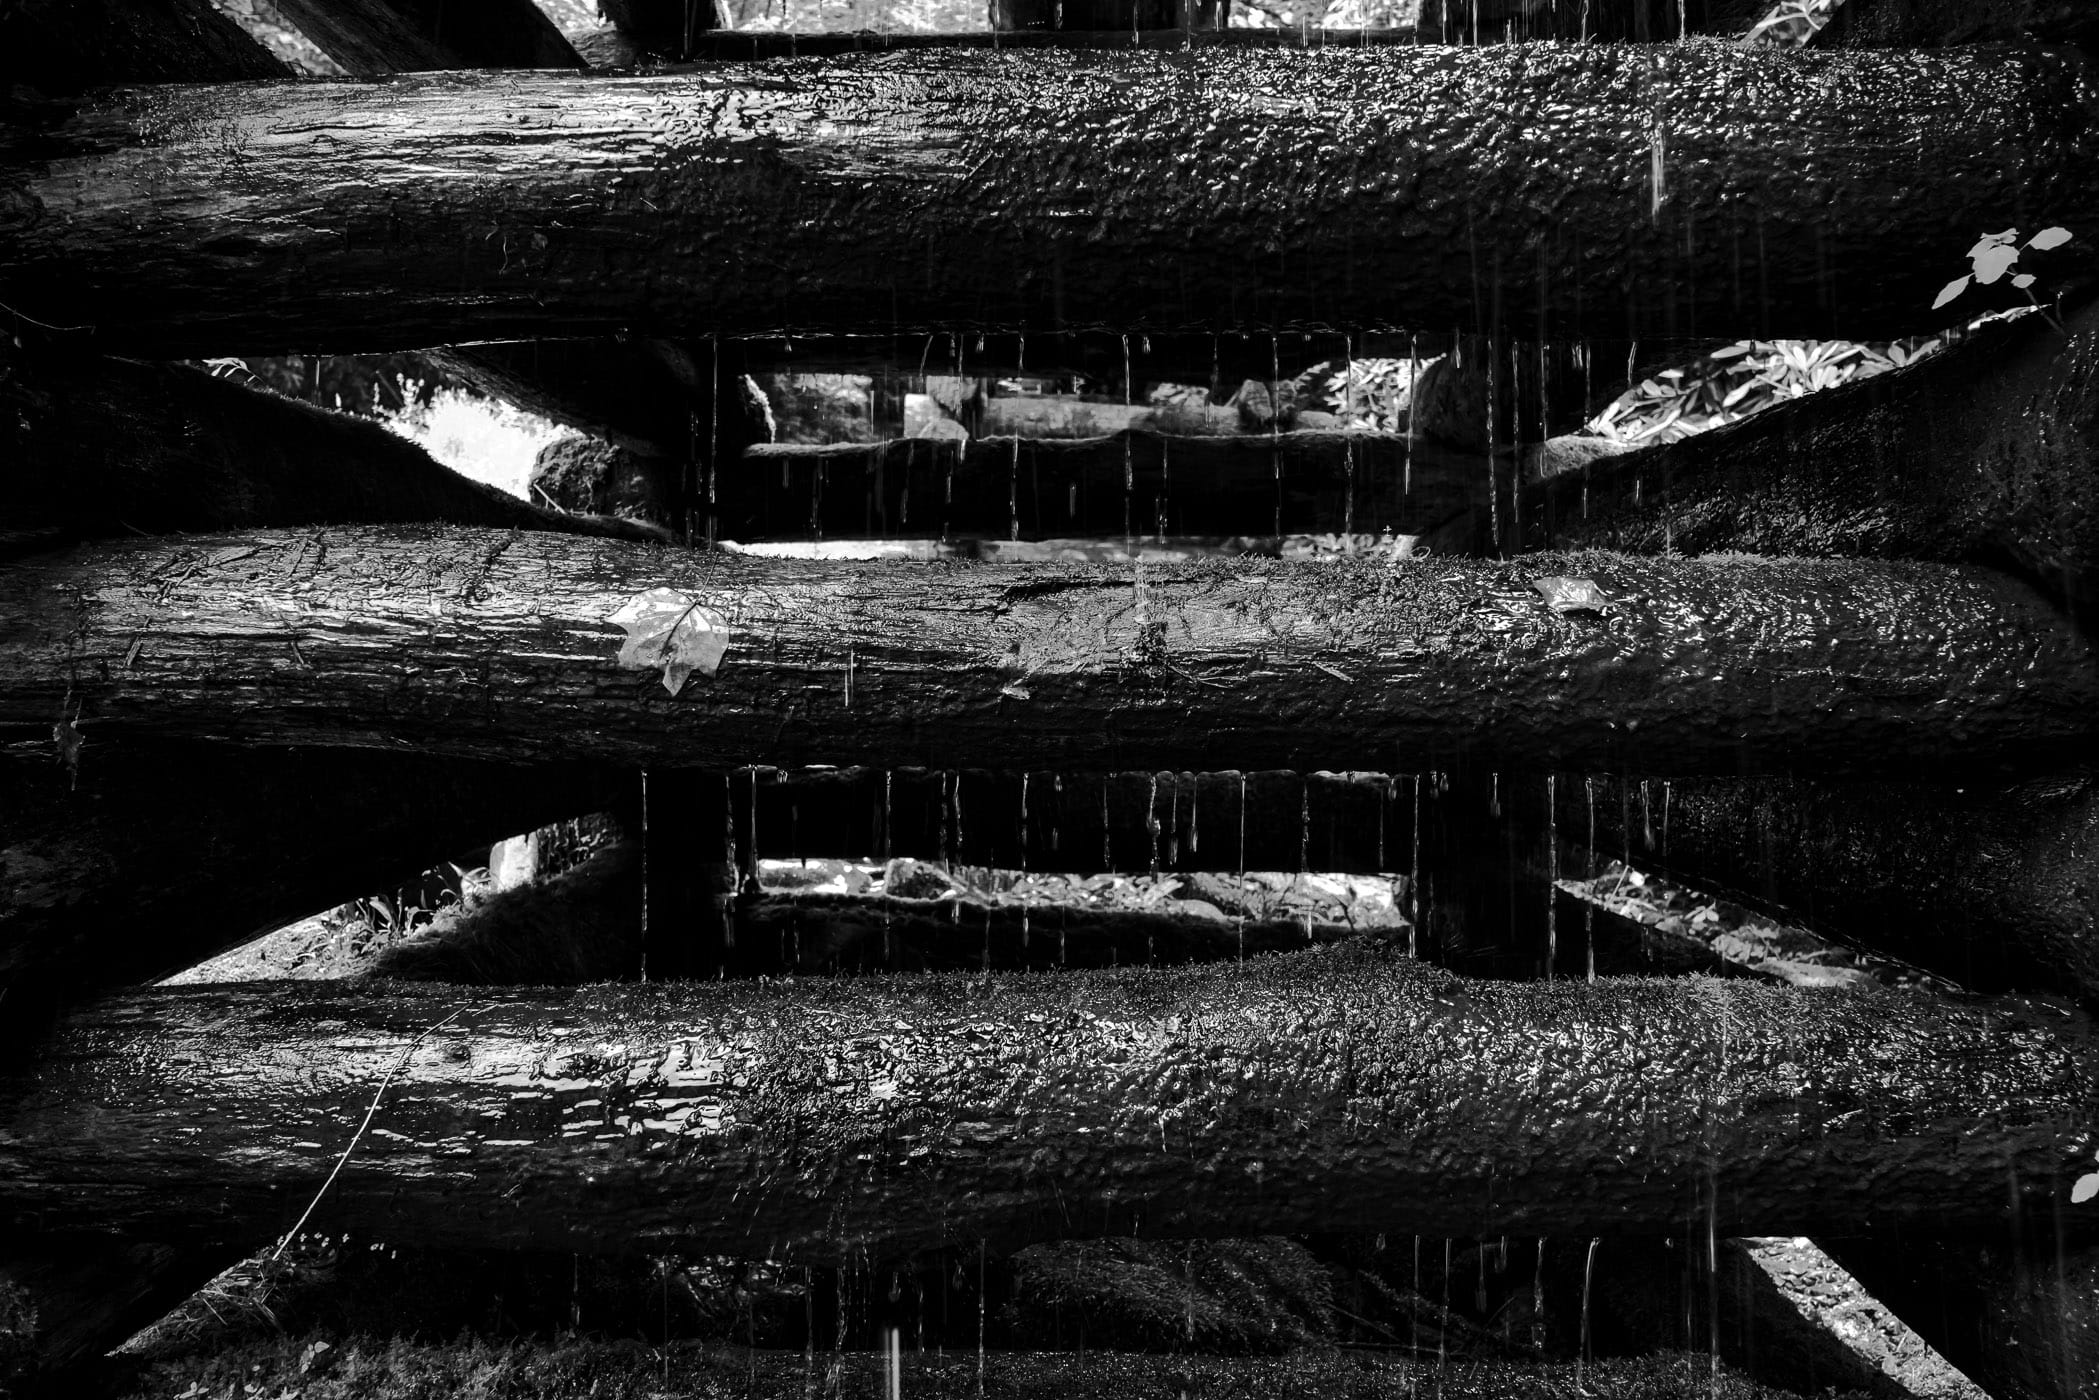 Water drips down the support structure of a flume at the historic Mingus Grist Mill in the Great Smoky Mountains National Park, Tennessee.